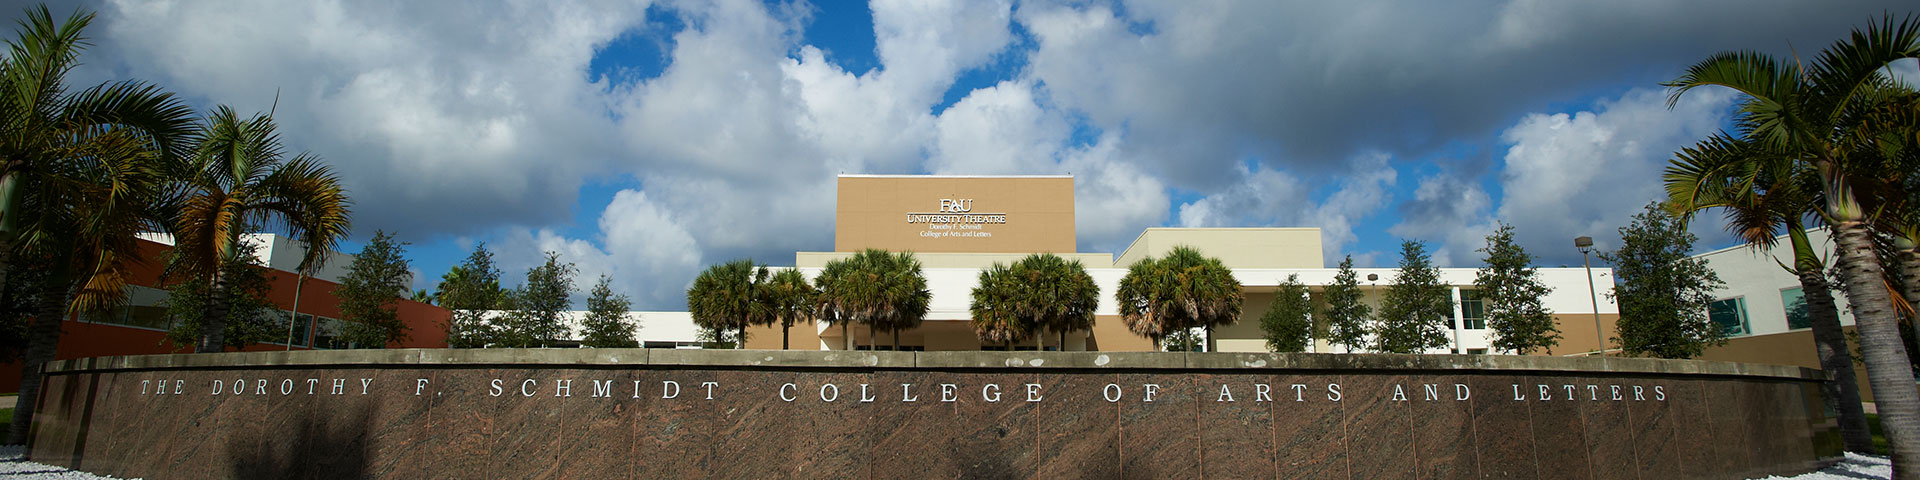 Sign outside building that says Dorothy F. Schmidt College of Arts and Letters